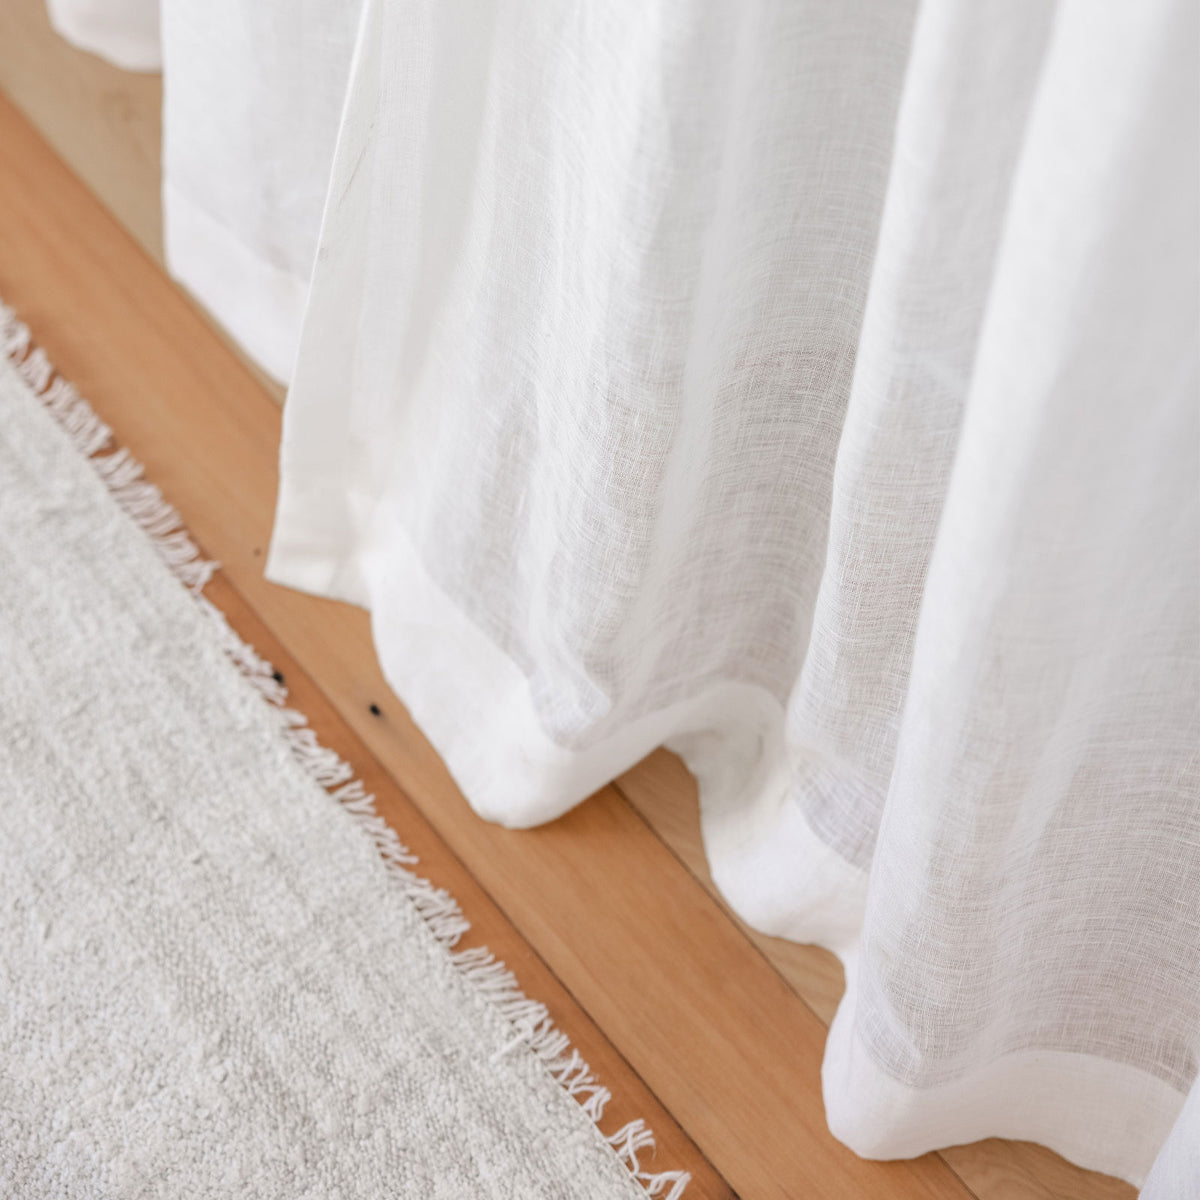 Looking at the bottom of a white sheer curtain on a wooden floor with a natural rug.